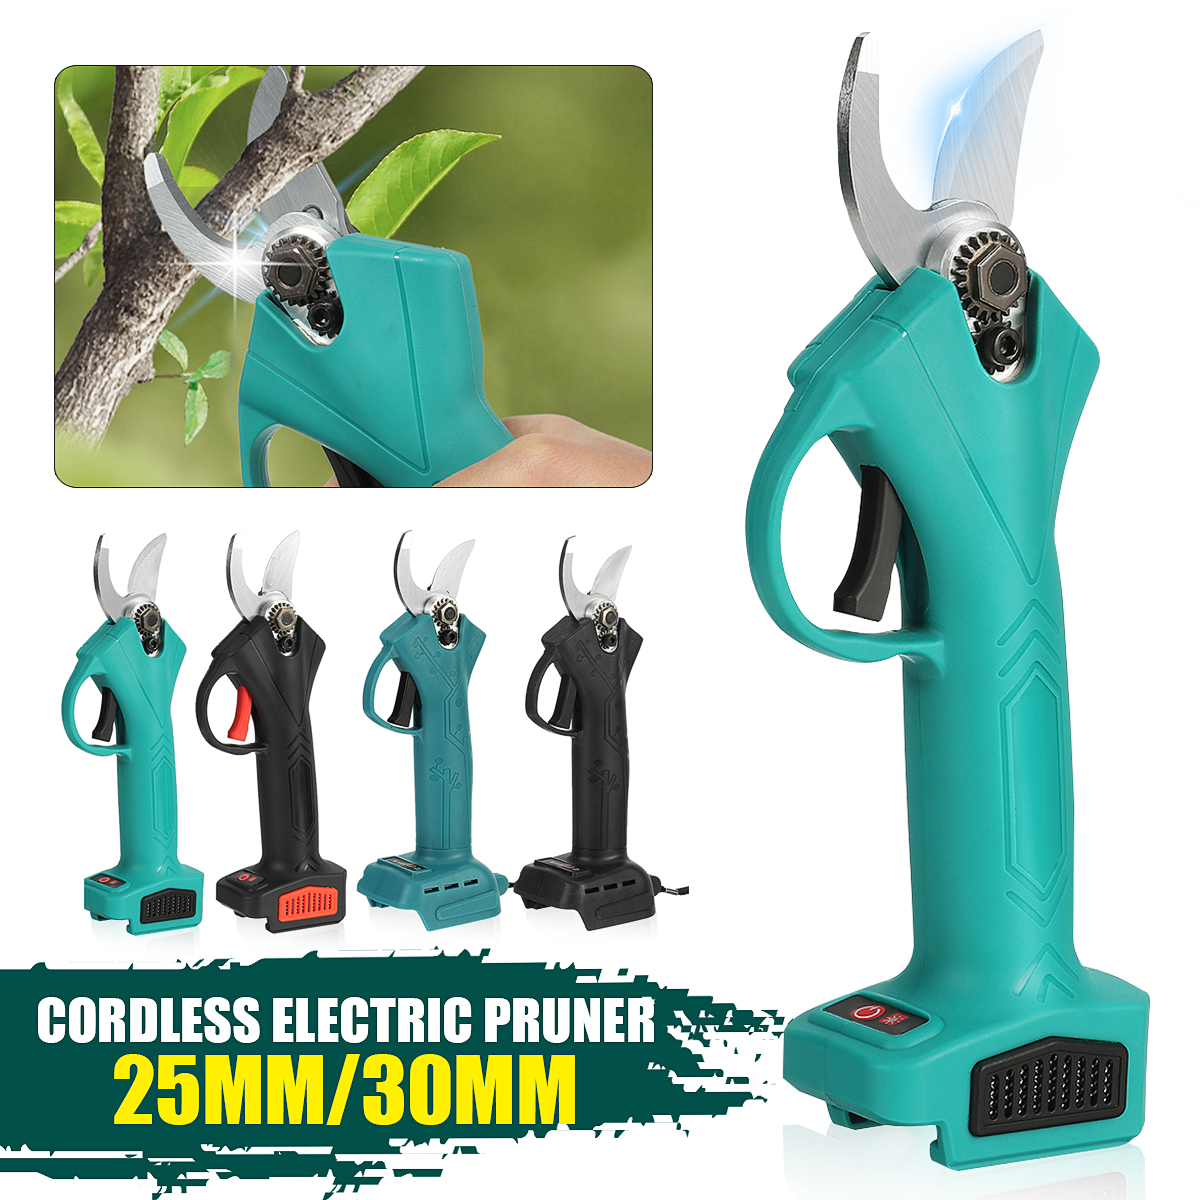 2530mm-Cordless-Electric-Branch-Scissors-Shear-Pruning-Cutter-Tool-Trimmer-For-WorxMakita-18V-21V-Ba-1816478-1